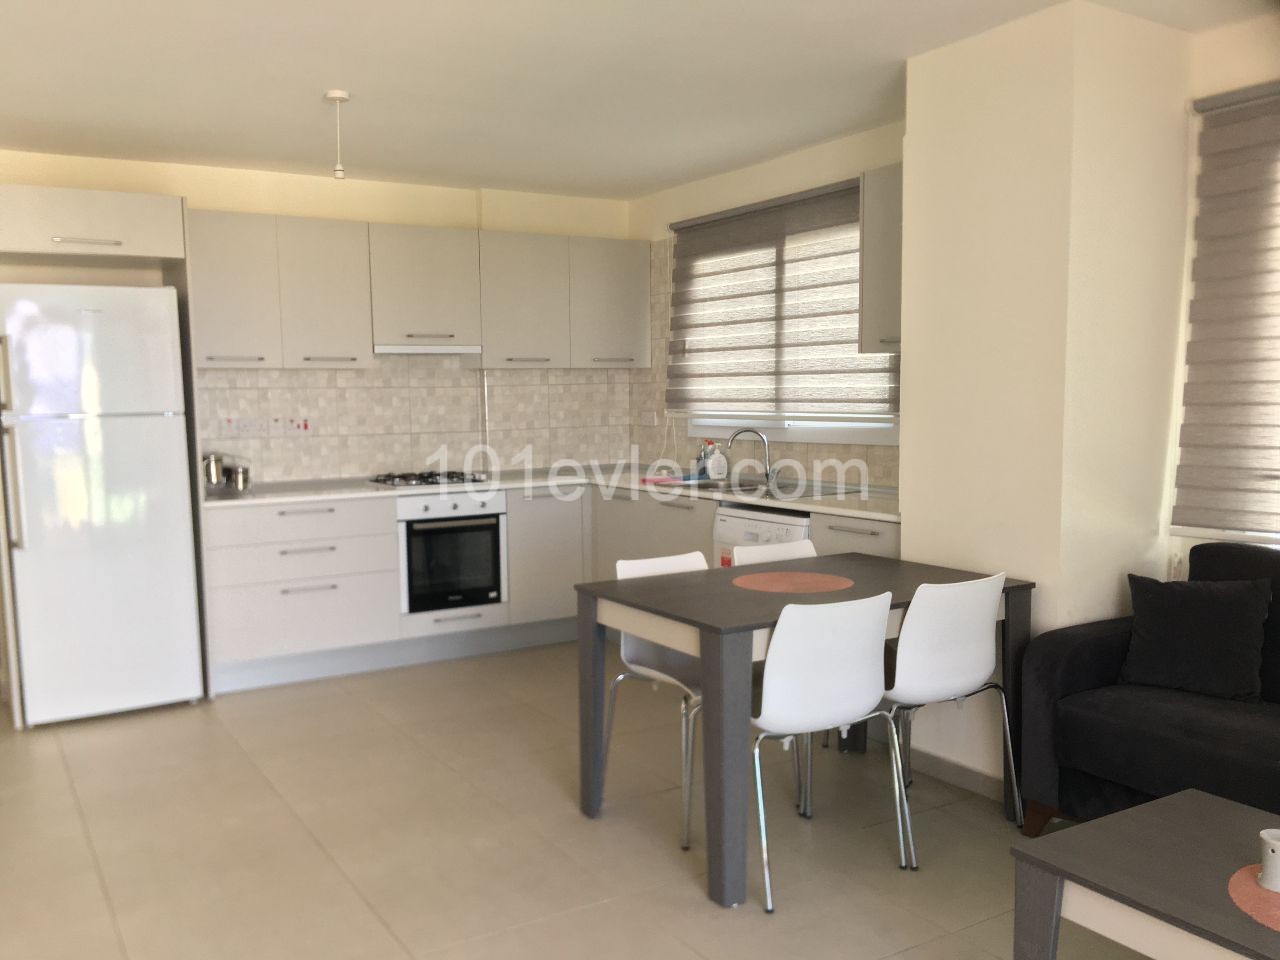 NEW PENTHOUSE FLAT FOR RENT IN KKTC KYRENIA CENTER ** 